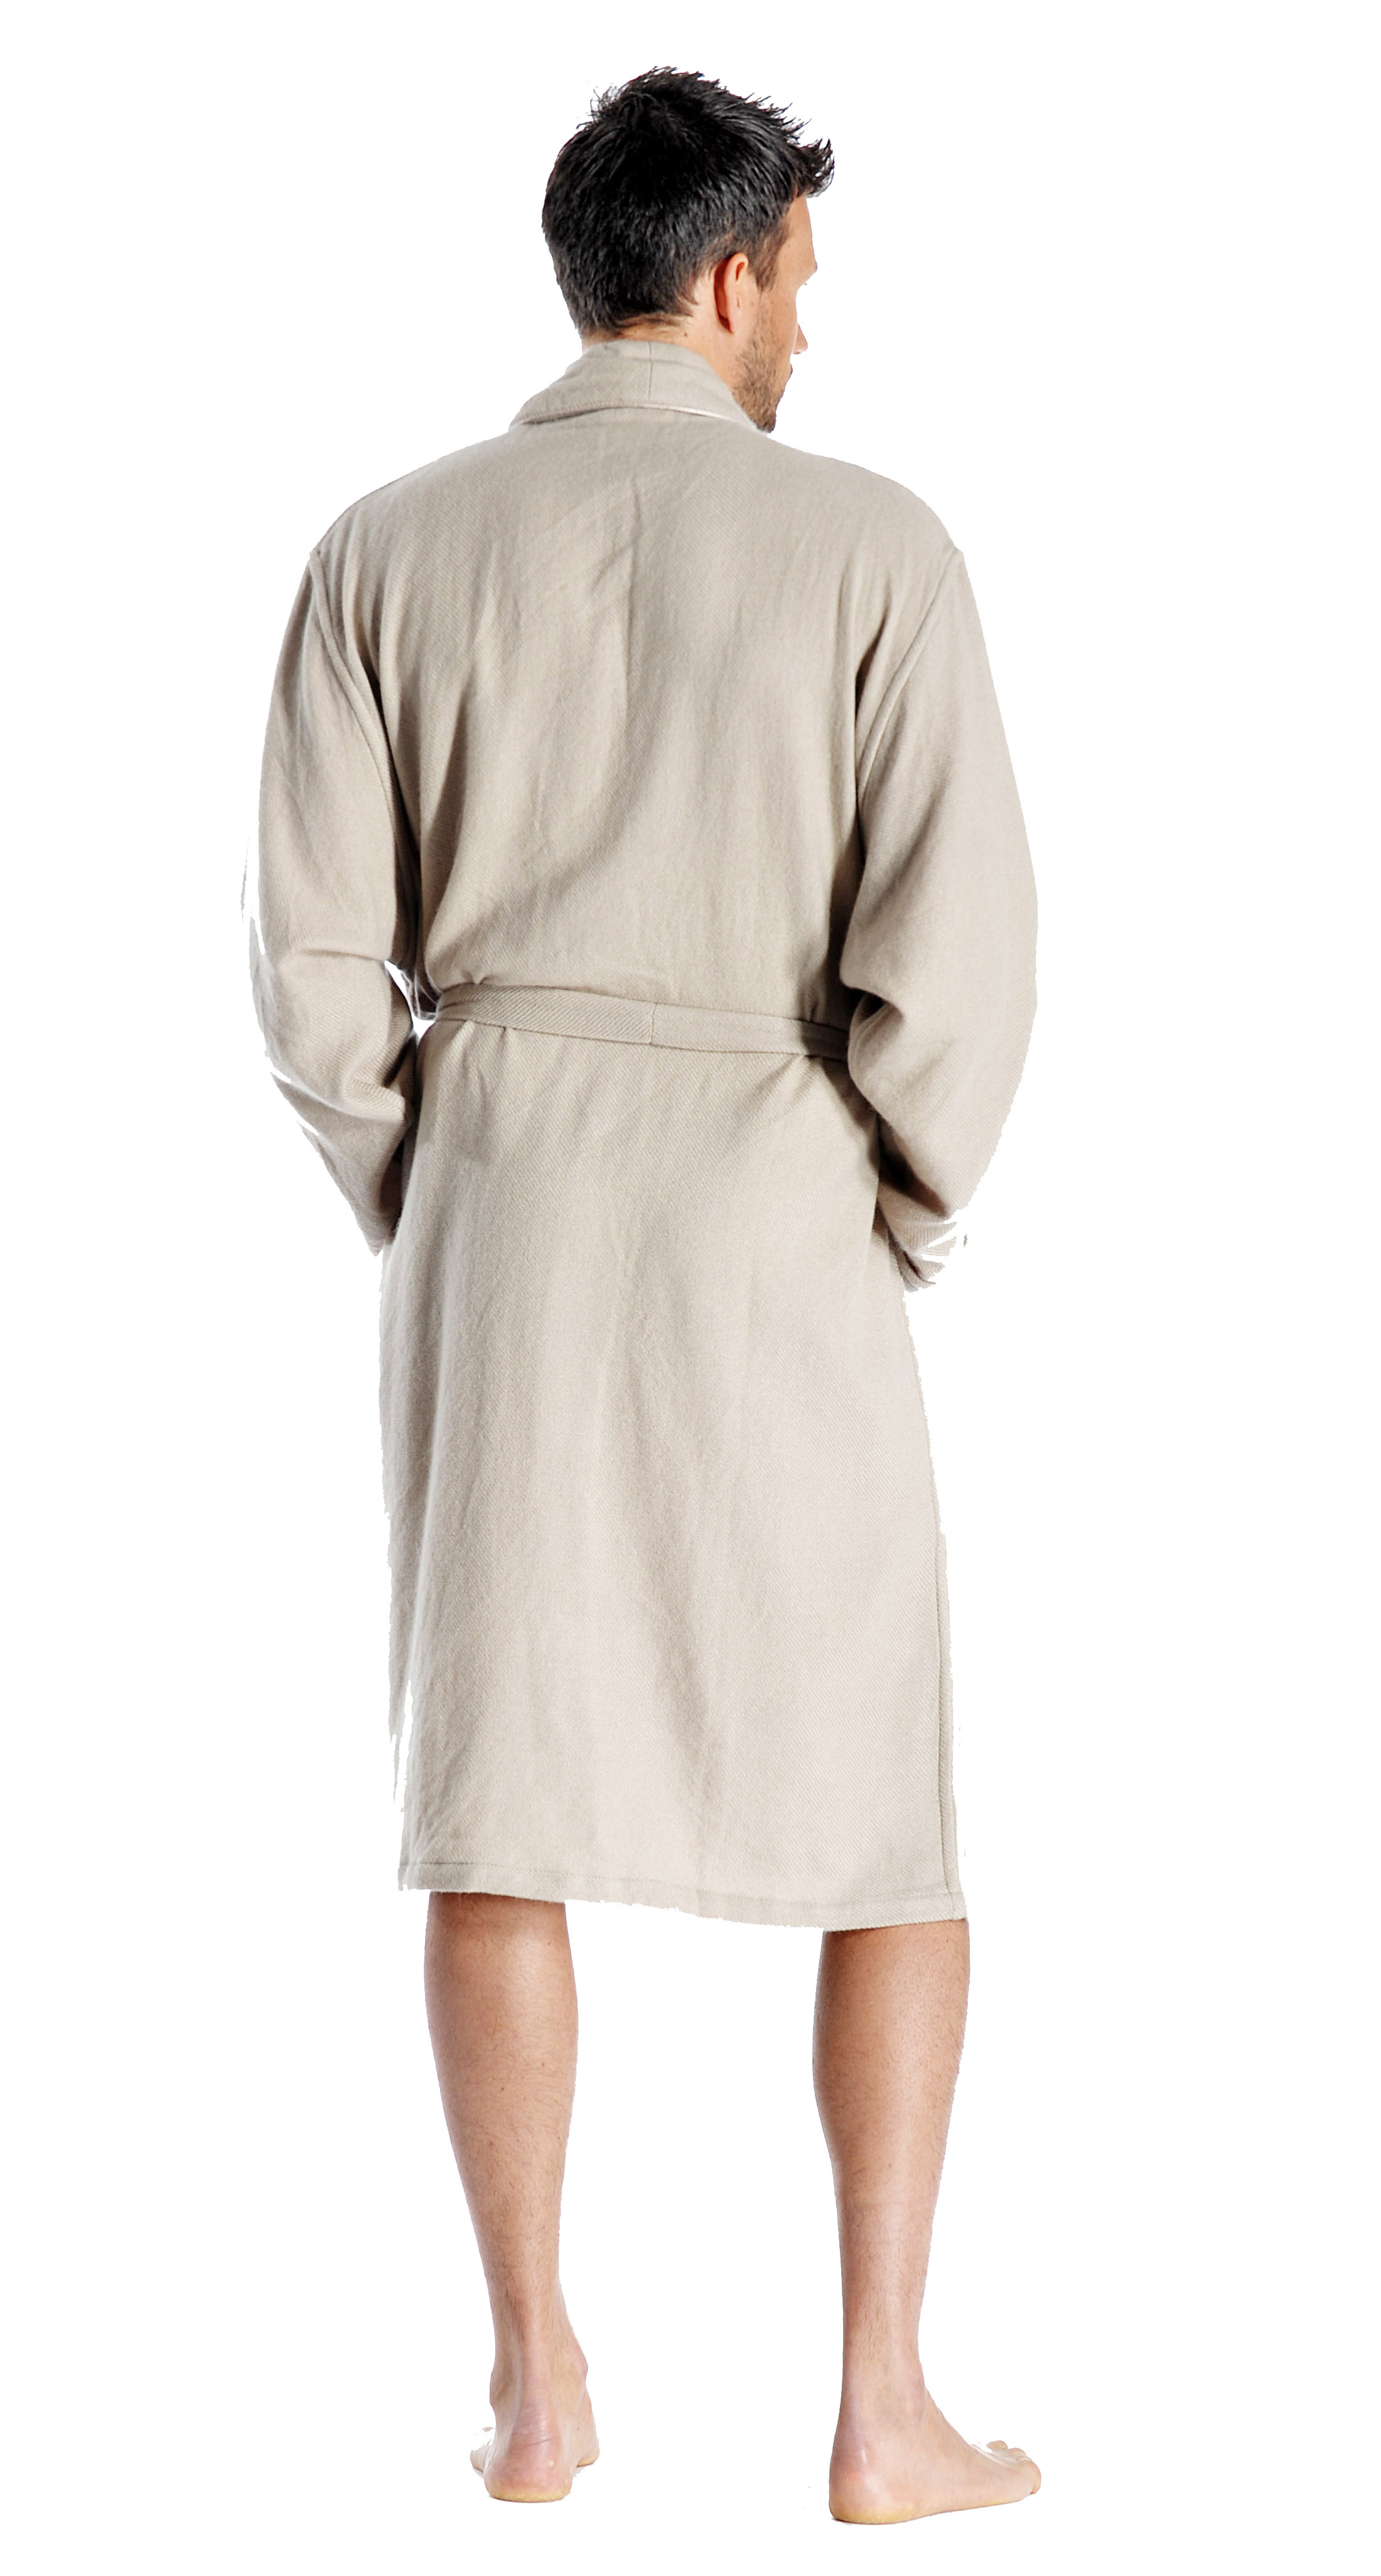 Pure Cashmere Knee Length Robe for Men (Camel, Large/Extra Large)